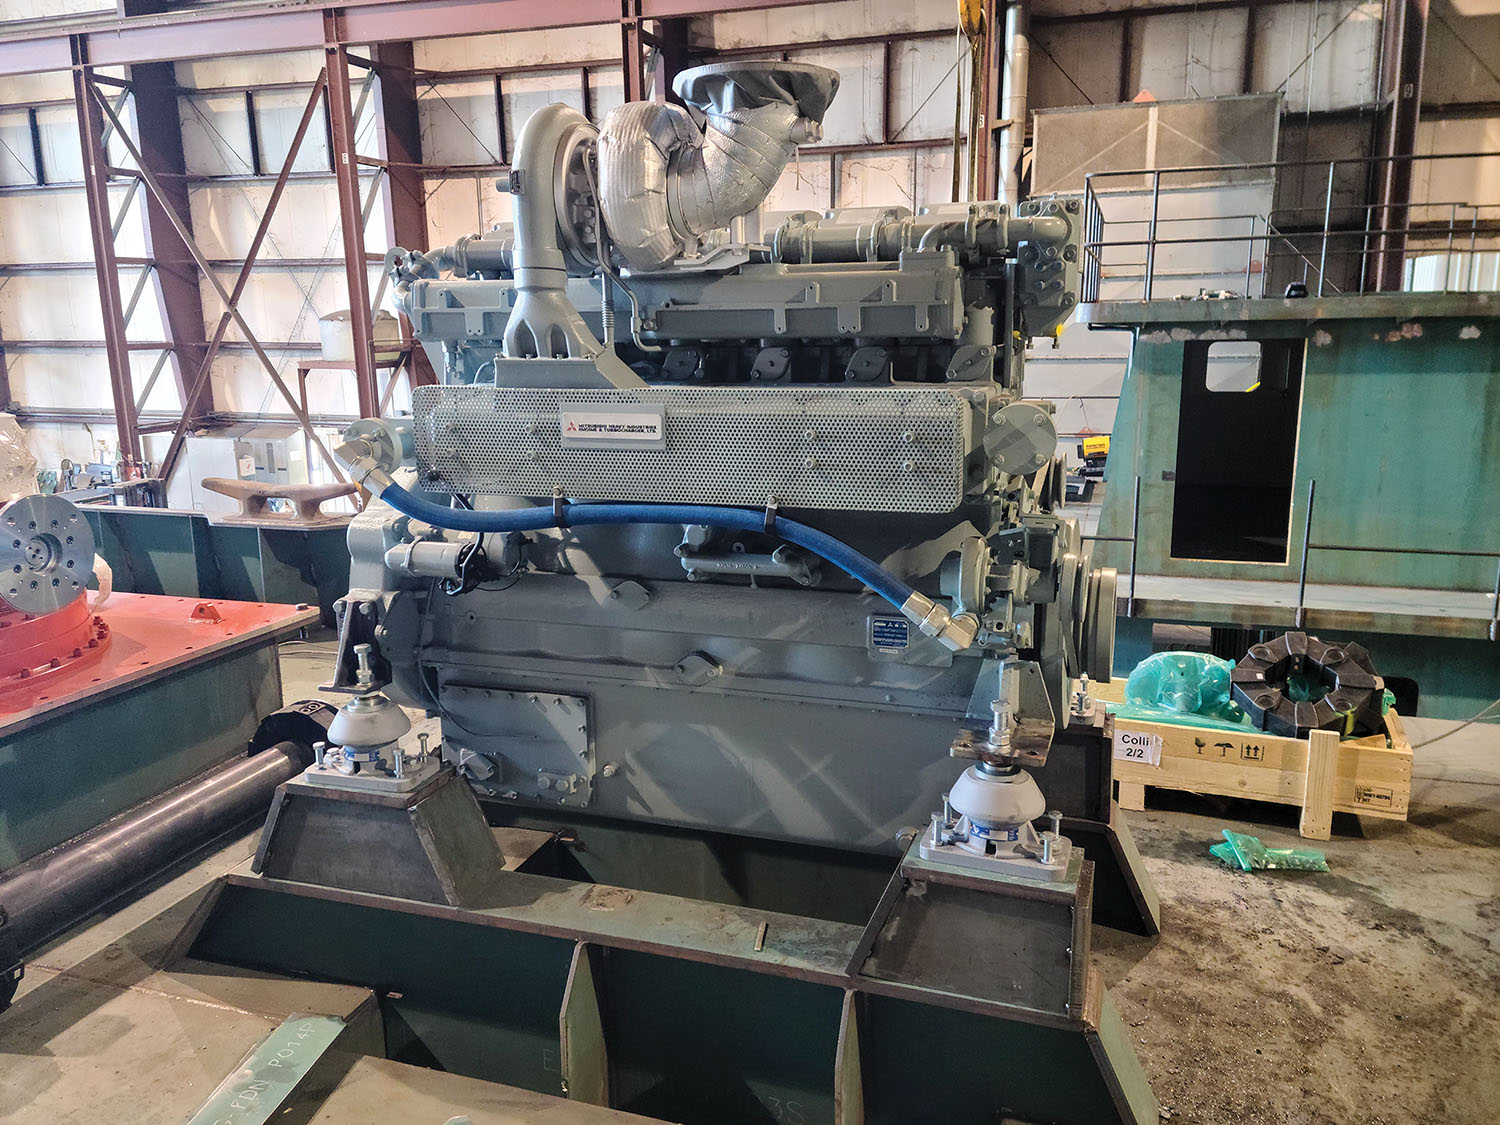 Awaiting installation at Kaskaskia Shipyard, this Mitsubishi S6R2 diesel engine from Laborde is one of two that will power the mv. Robert S. Wilkins. (Photo courtesy of Southern Illinois Transfer Company)